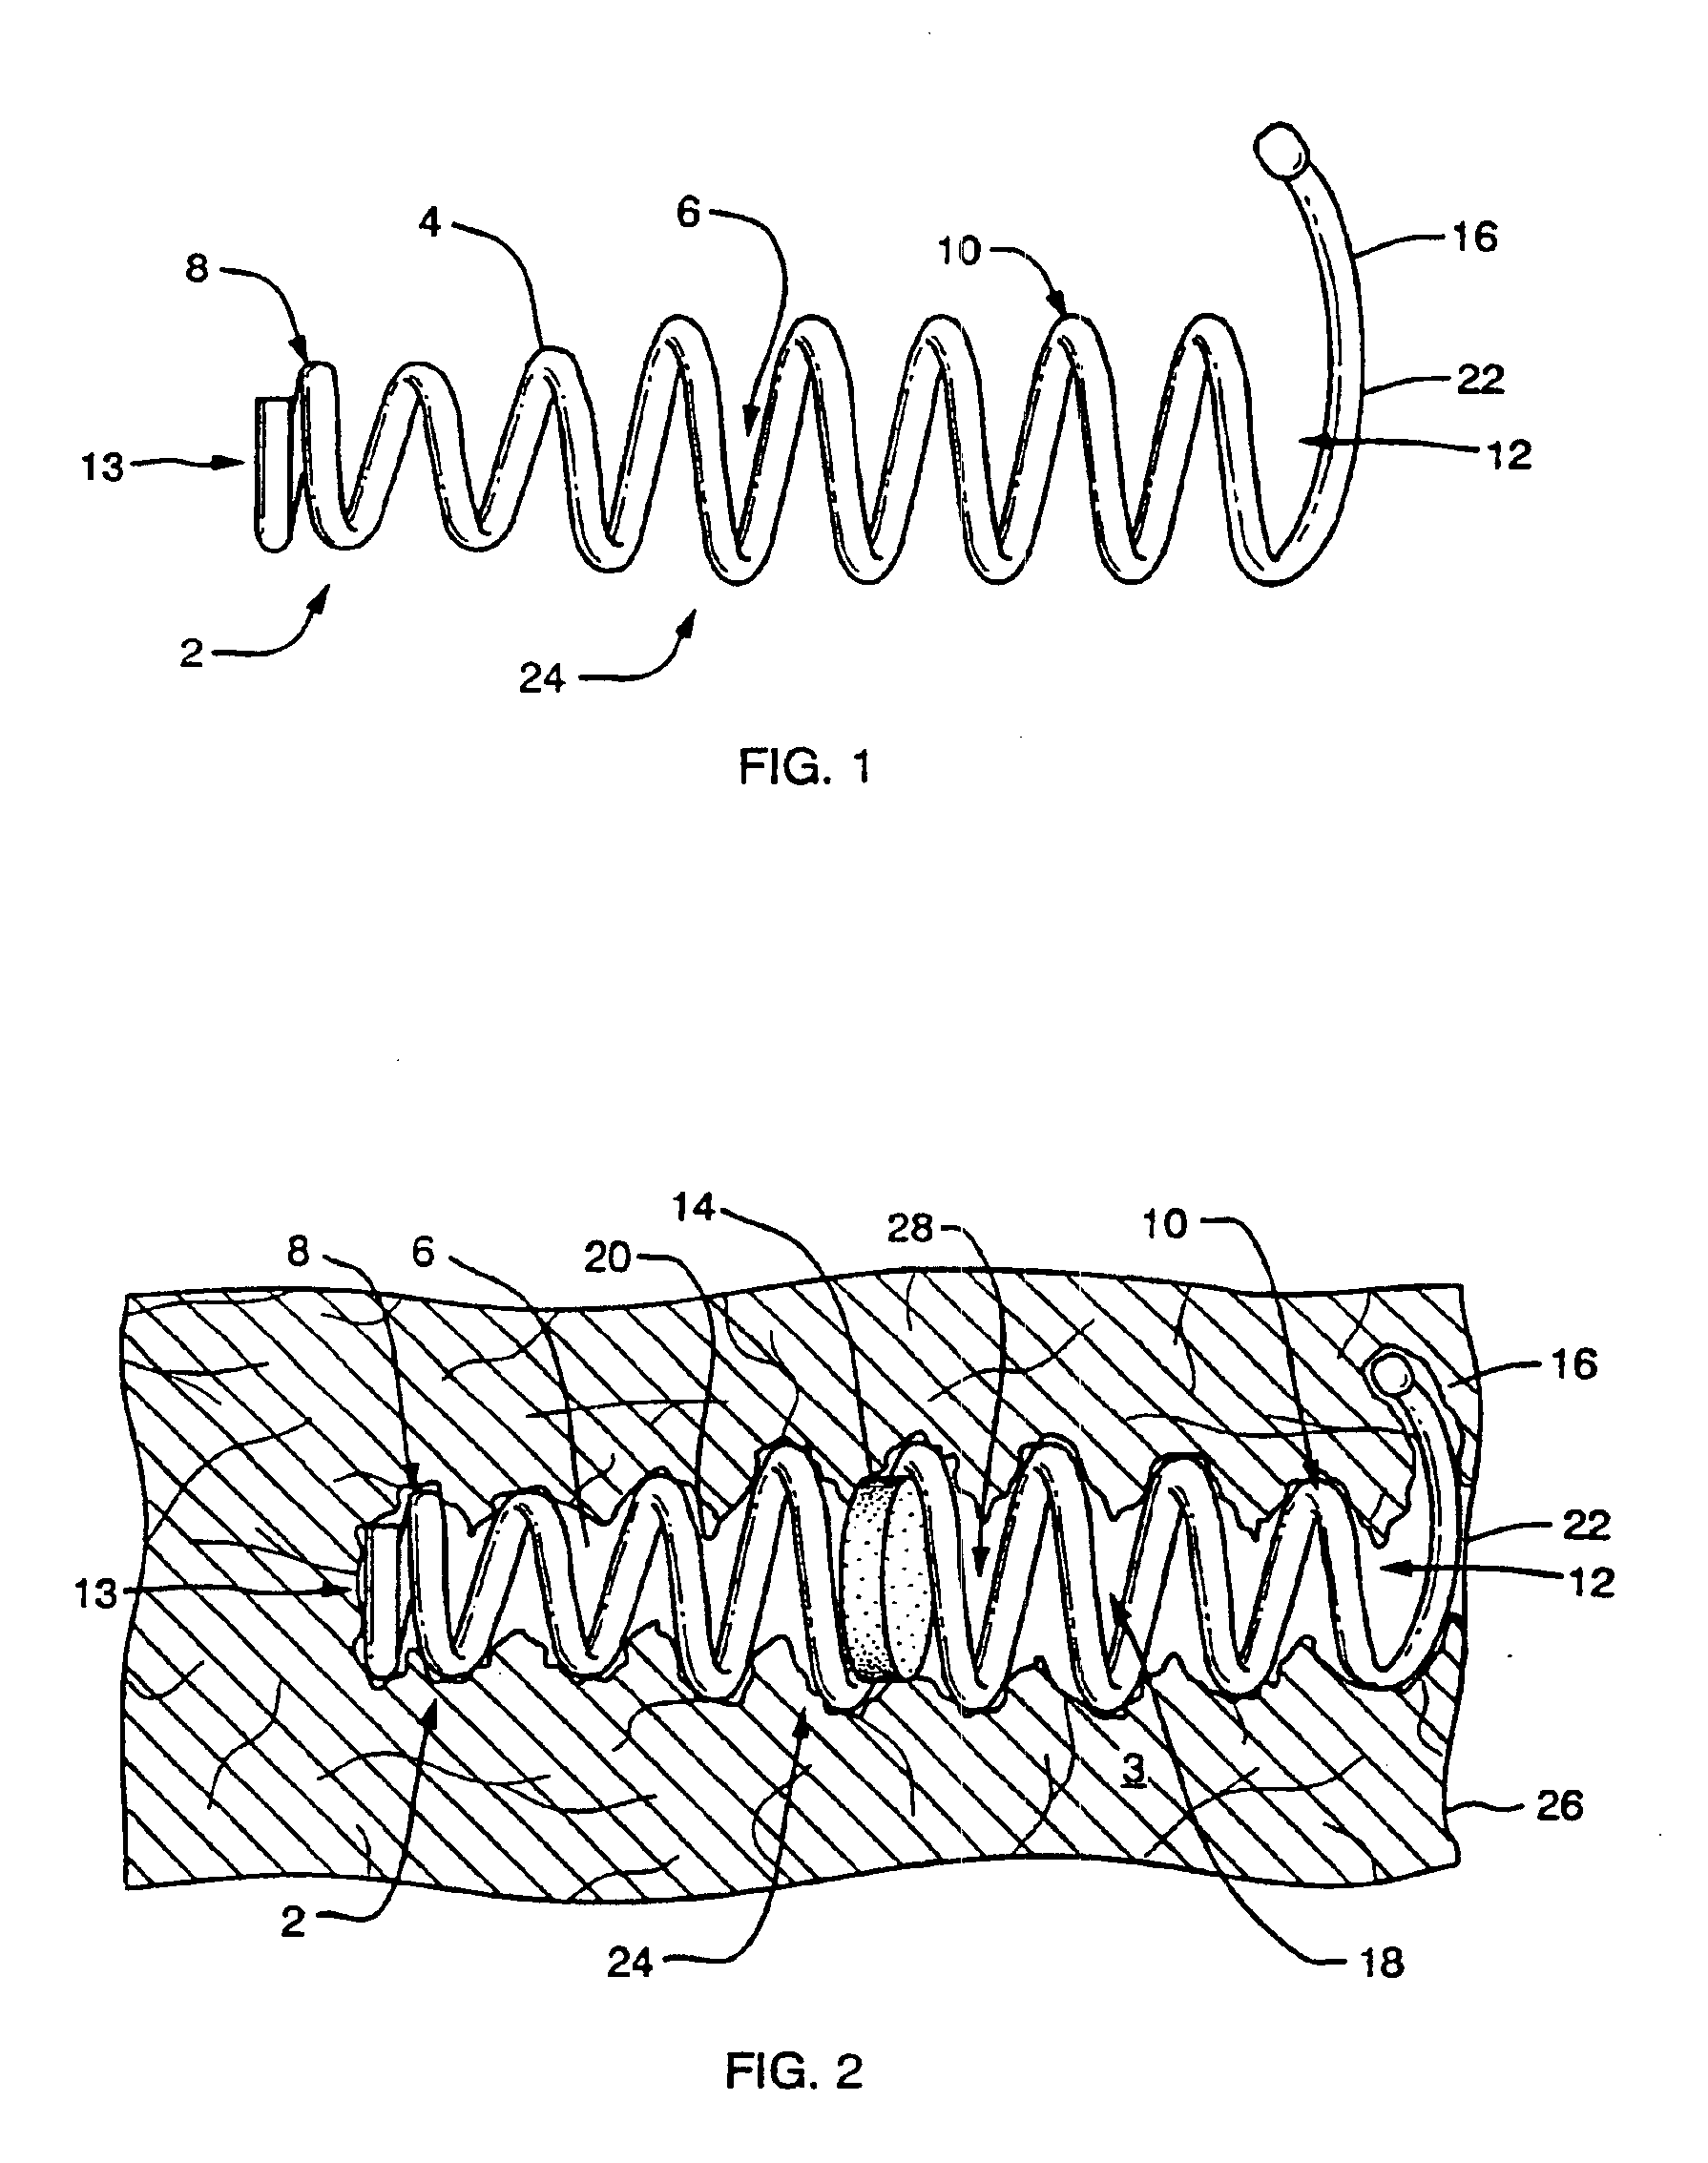 Implant and agent delivery device